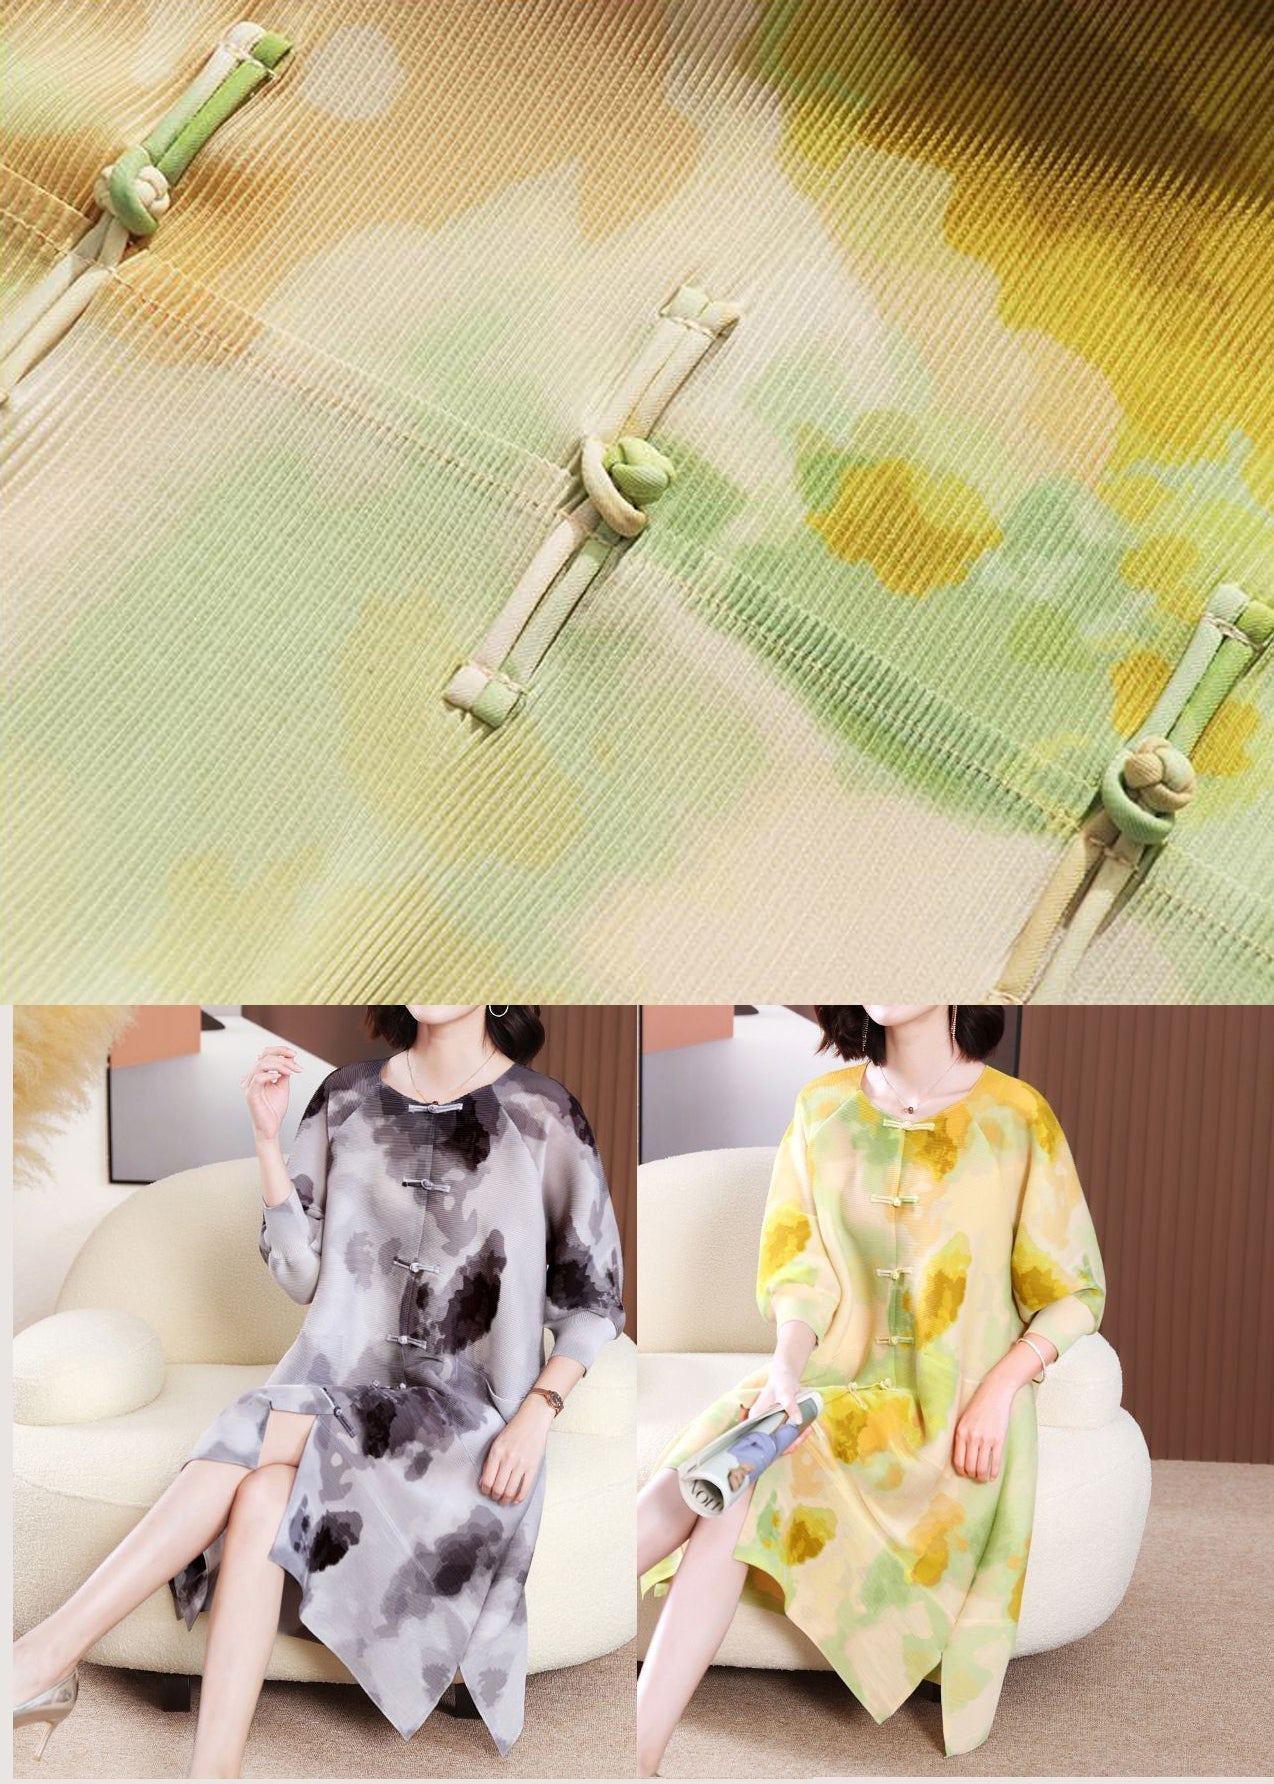 Yellow Print Long Dresses Chinese Button Side Open Summer LY2745 - fabuloryshop